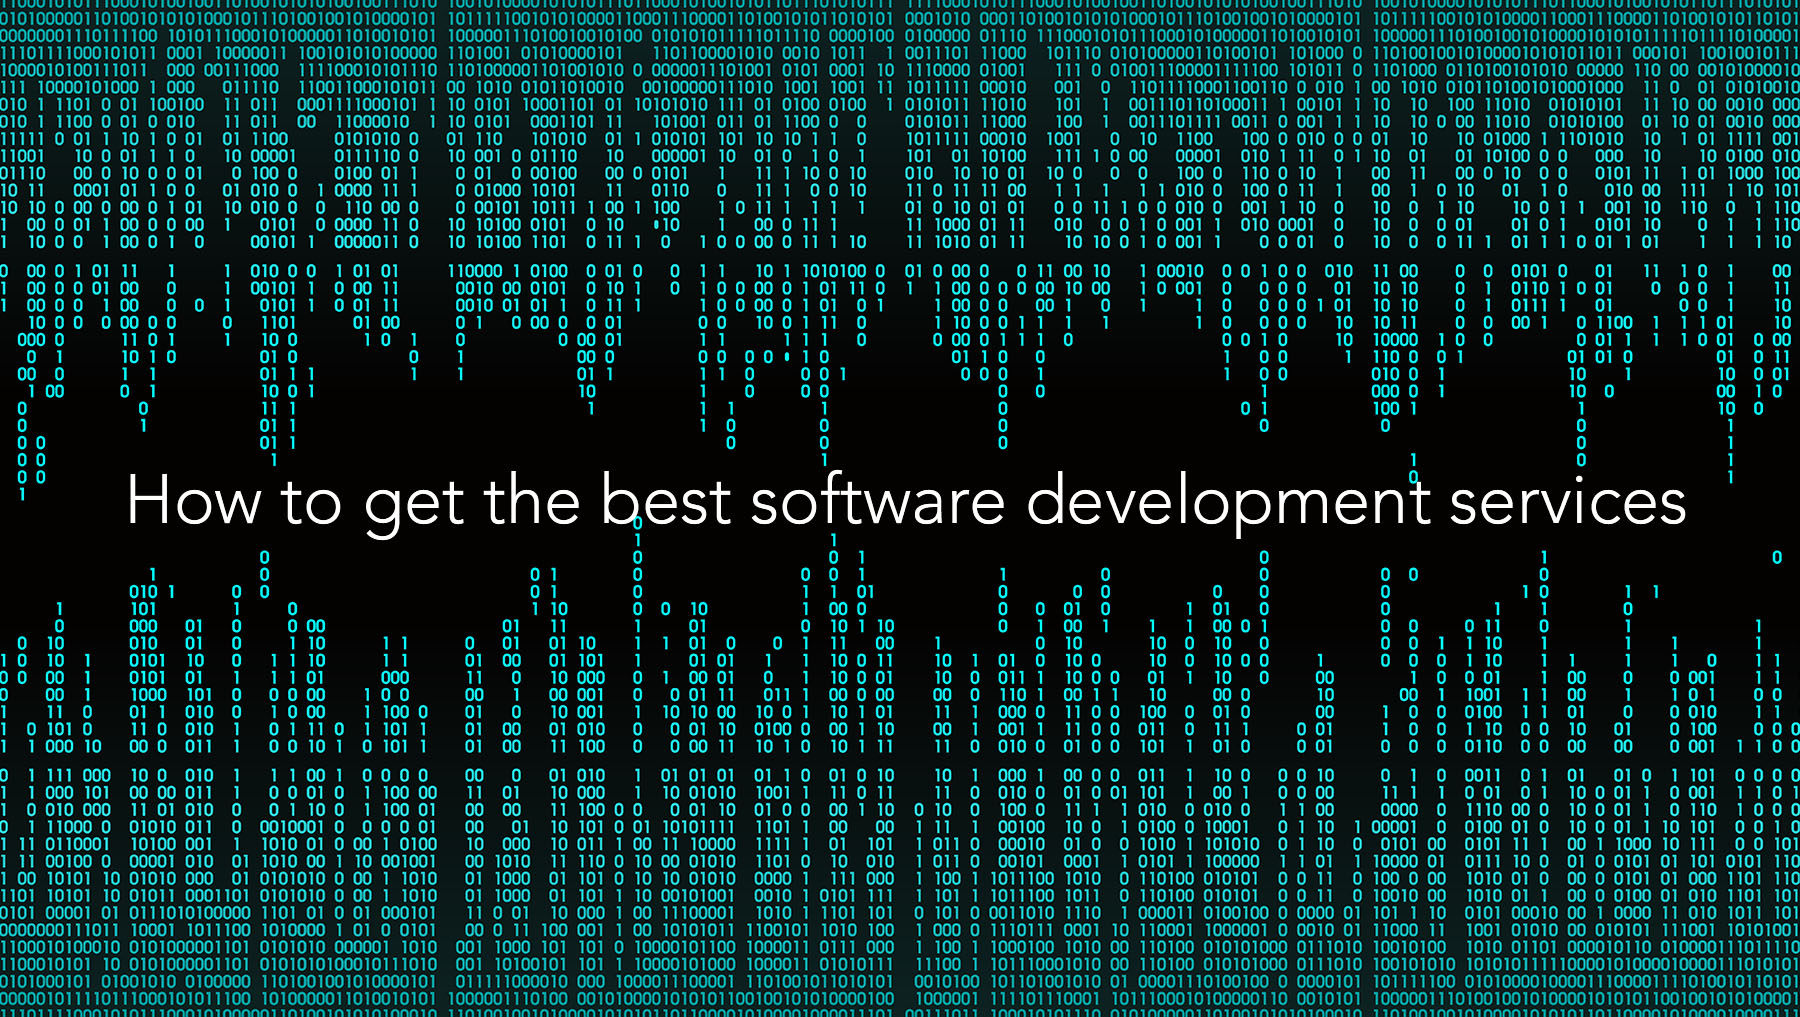 How to get the best software development services